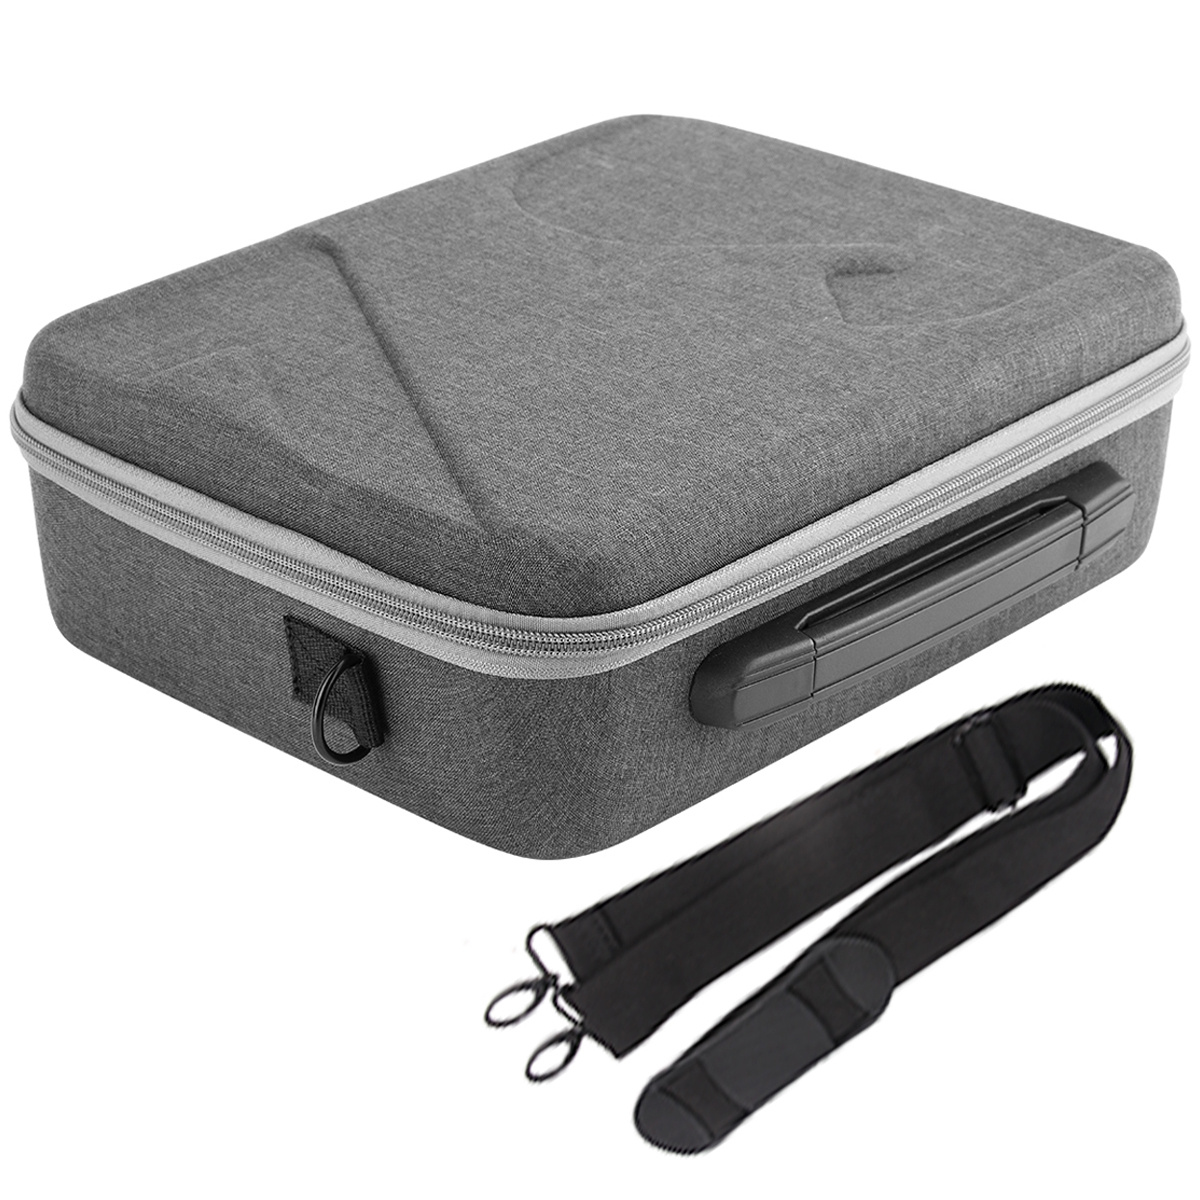 Shoulder Bag Transport Storage for DJI Mini 3 Pro Drone and RC-N1 Remote  Controller - GRAY - Maison Du Drone